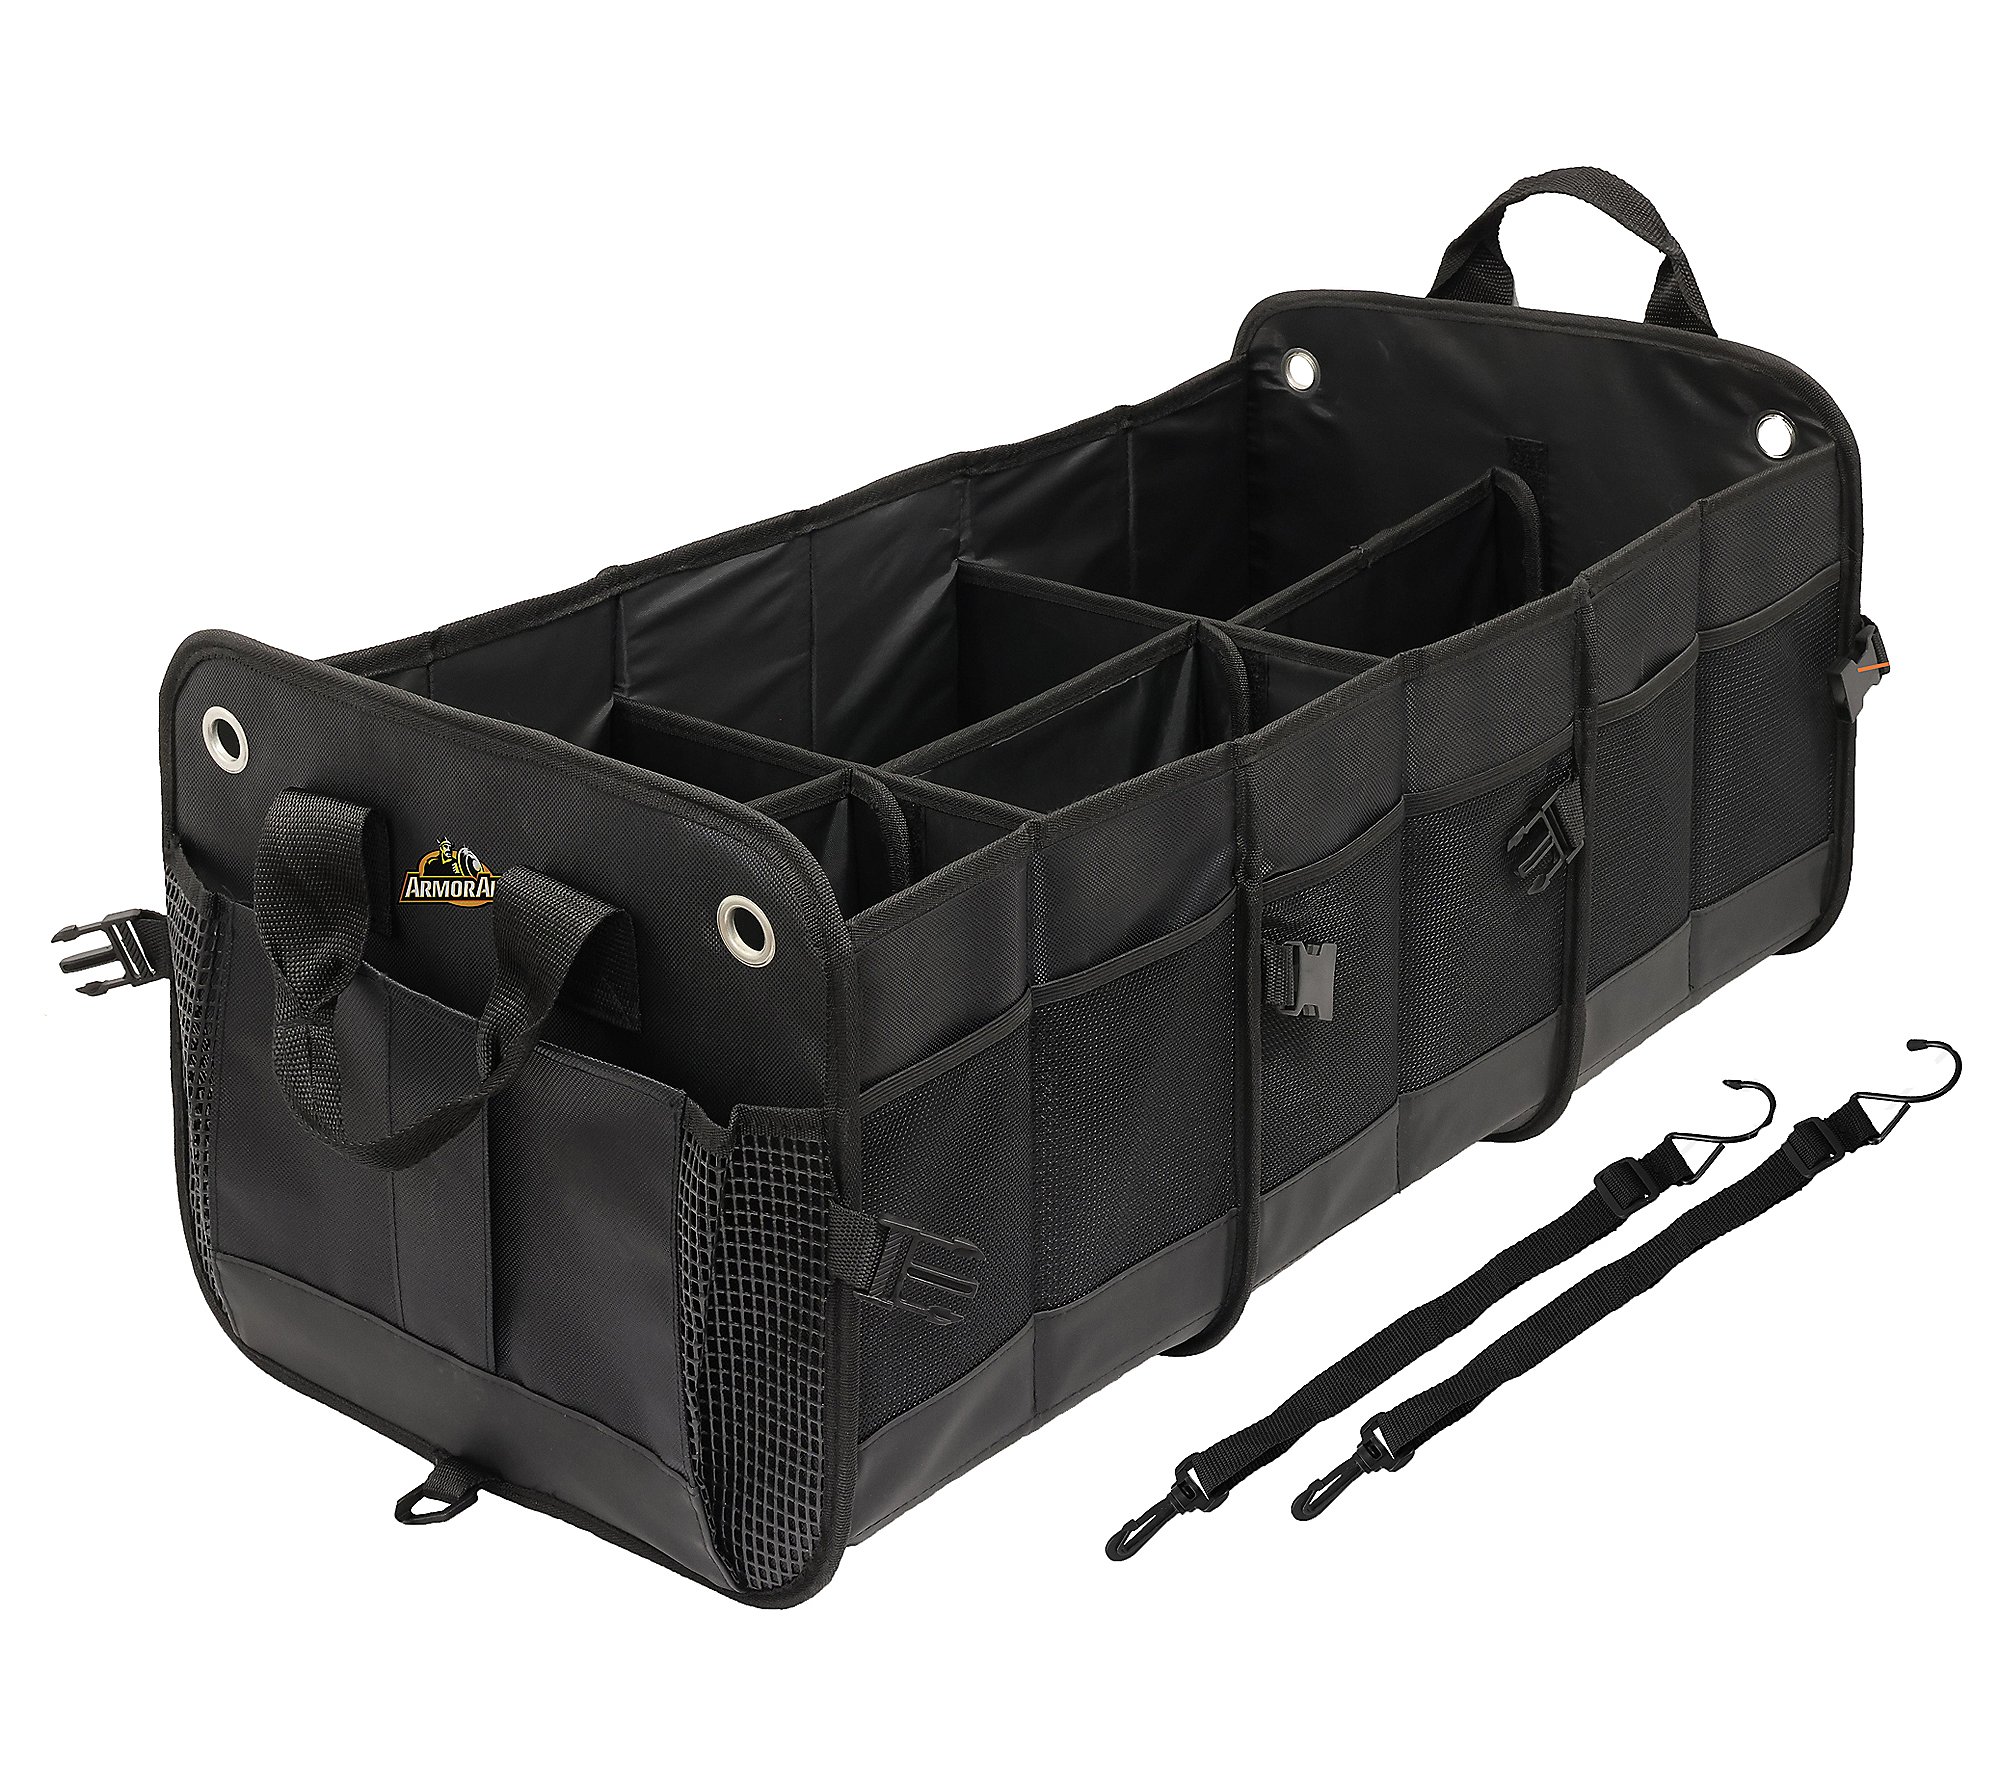 Armor All Collapsible Trunk Organizer with Straps and Dividers